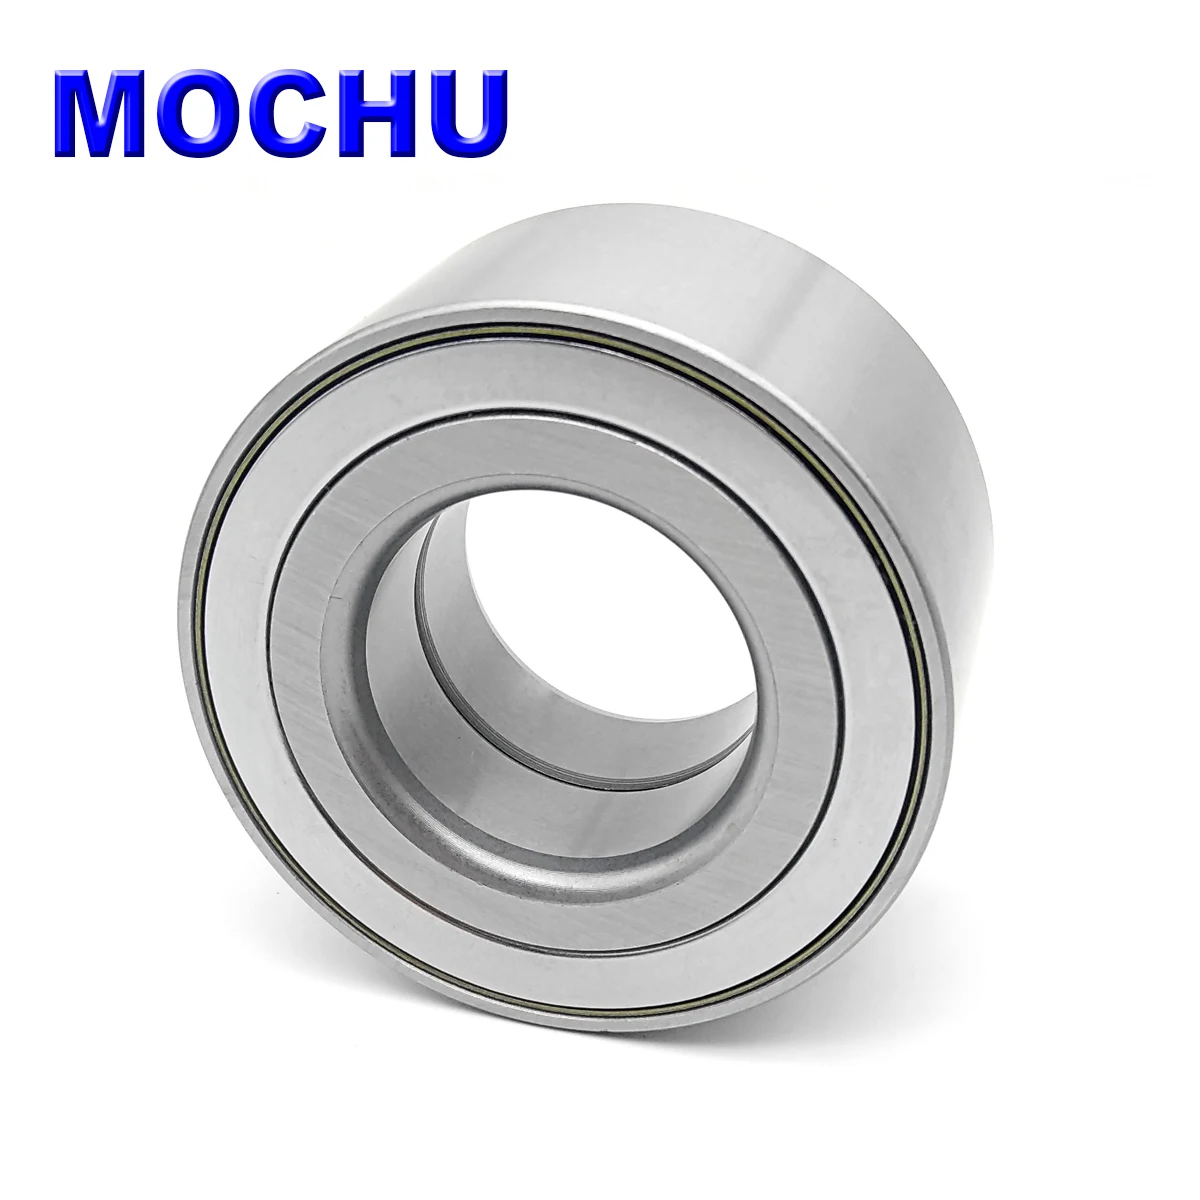 

1pcs DAC51910042/44ABS 51x91x42x44 DAC51914244M 44300-T2A-A51 MOCHU Hub Wheel Bearing With ABS sensor ring For Honda